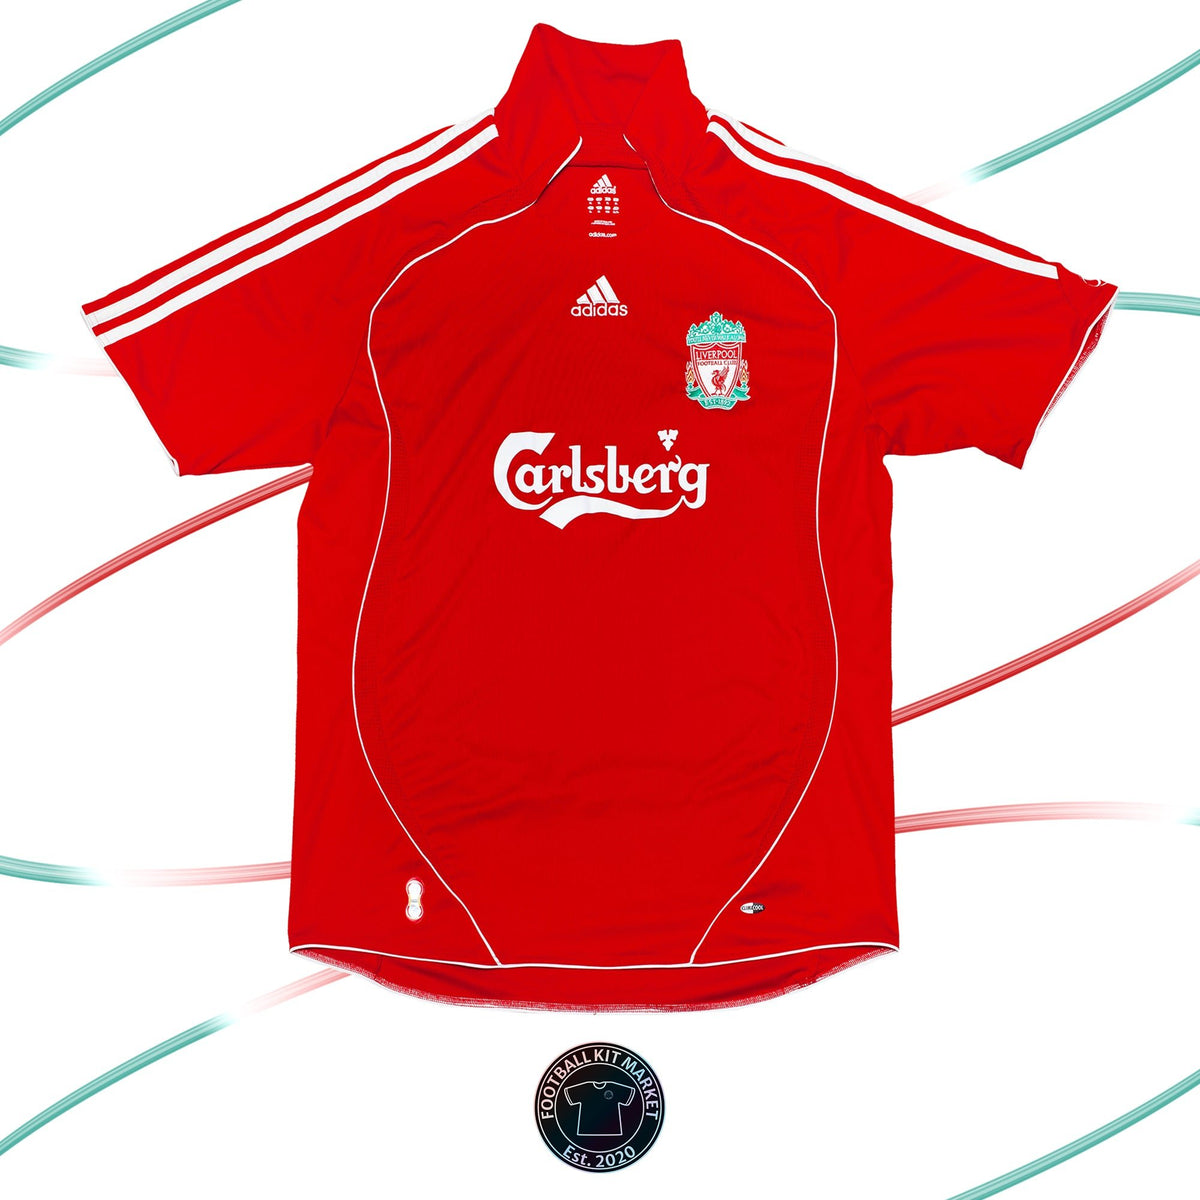 Genuine LIVERPOOL Home Shirt (2006-2008) - ADIDAS (XL) - Product Image from Football Kit Market